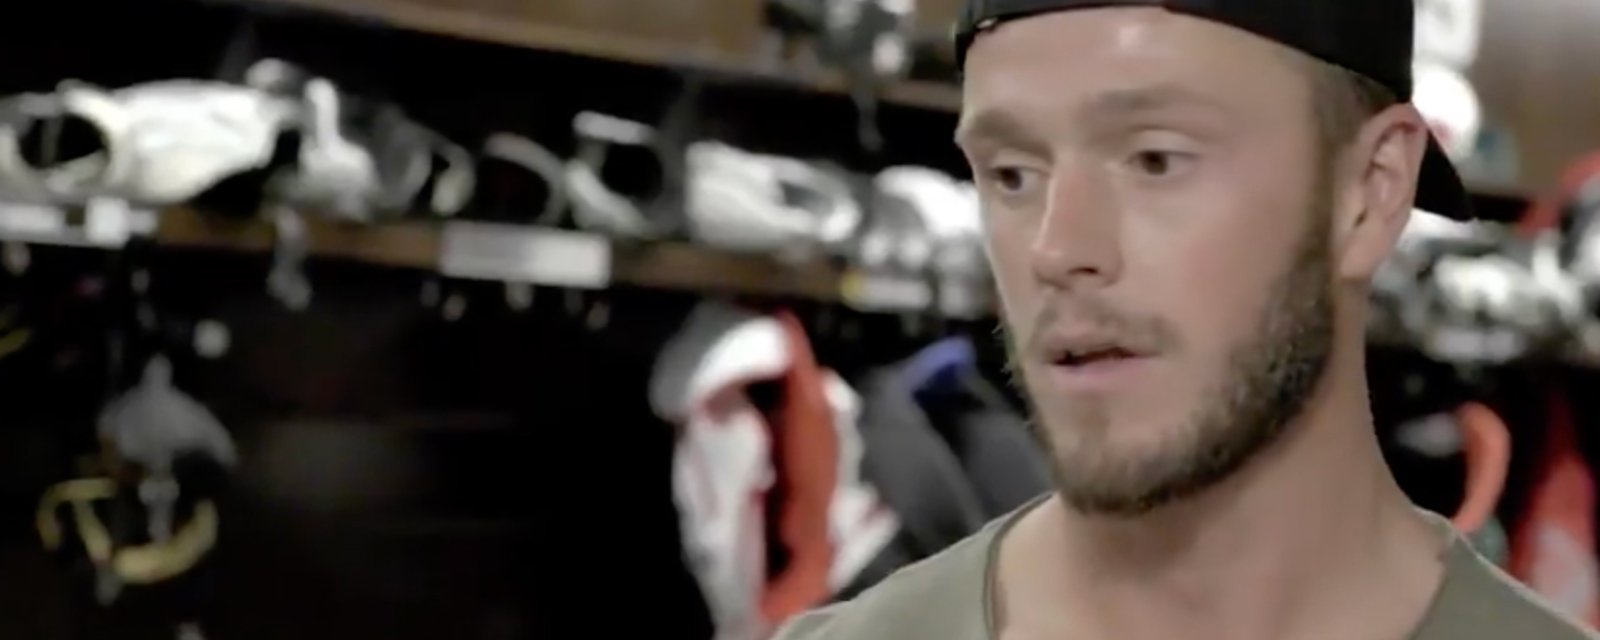 Jonathan Toews reveals what he’s been dealing with and his mysterious health issues! 